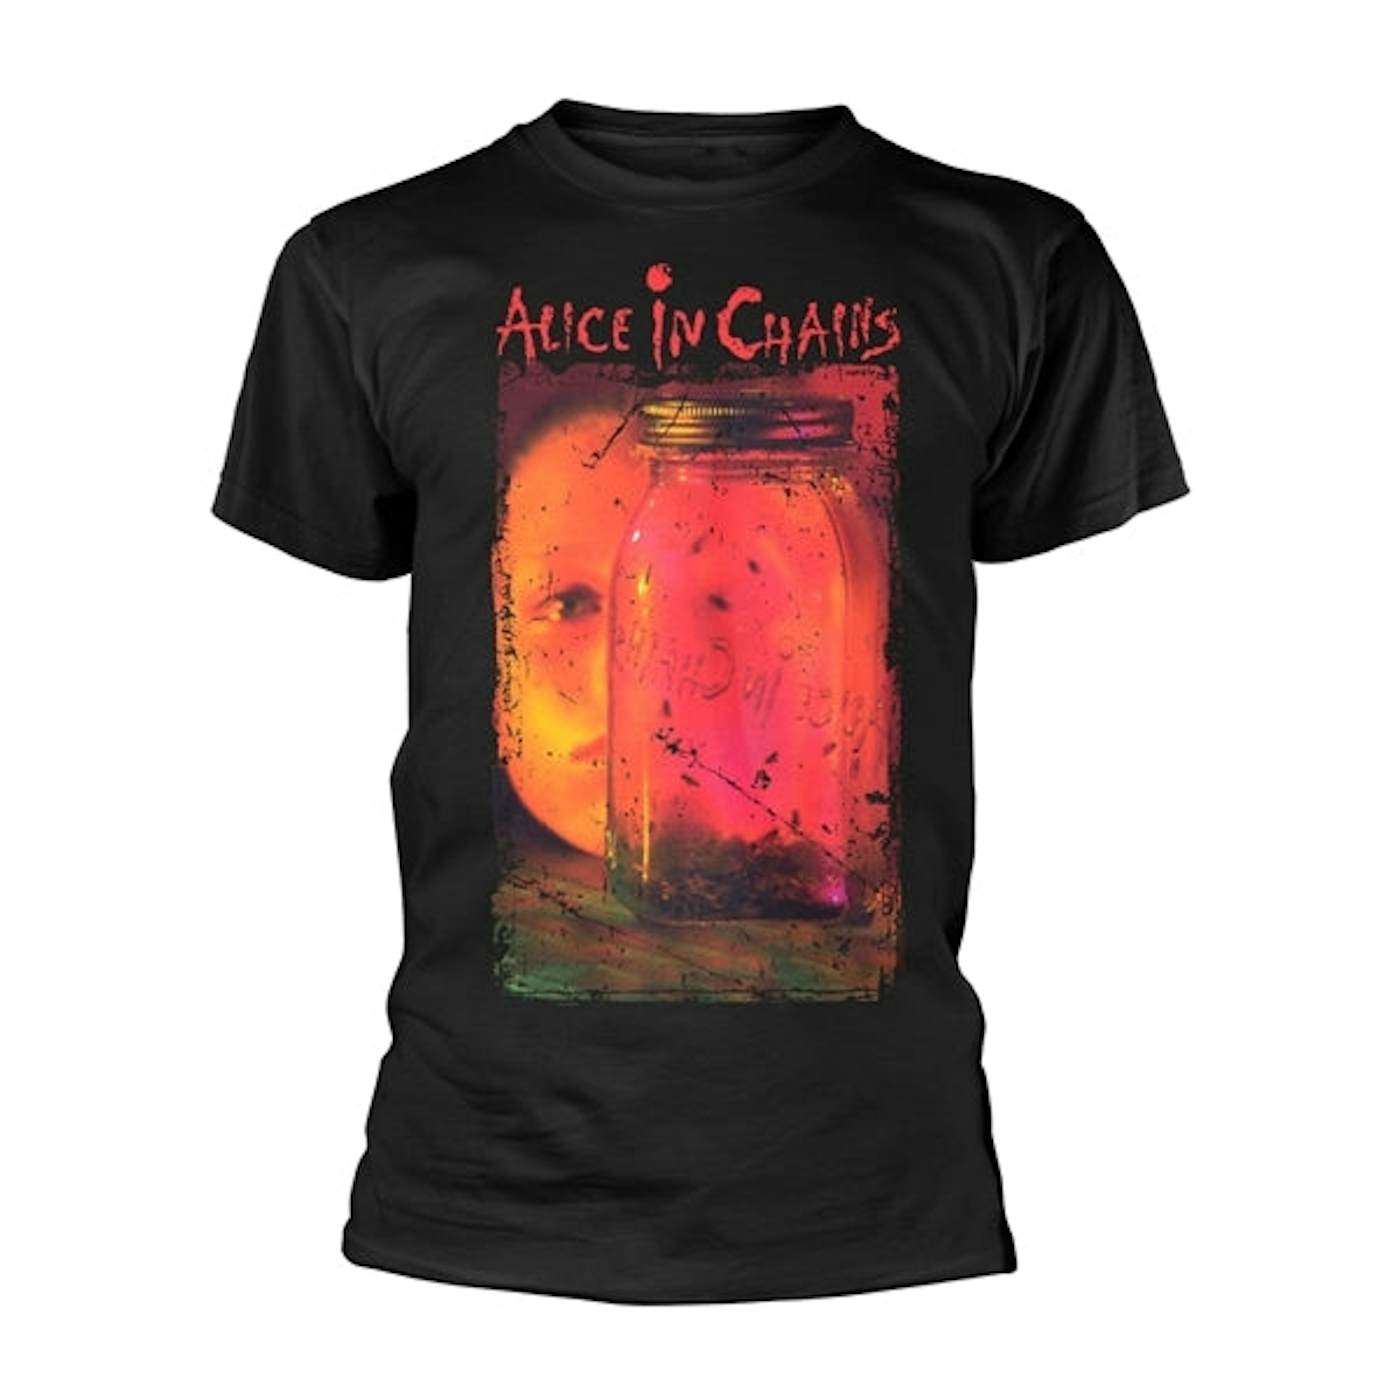 Alice In Chains T Shirt - Jar Of Flies